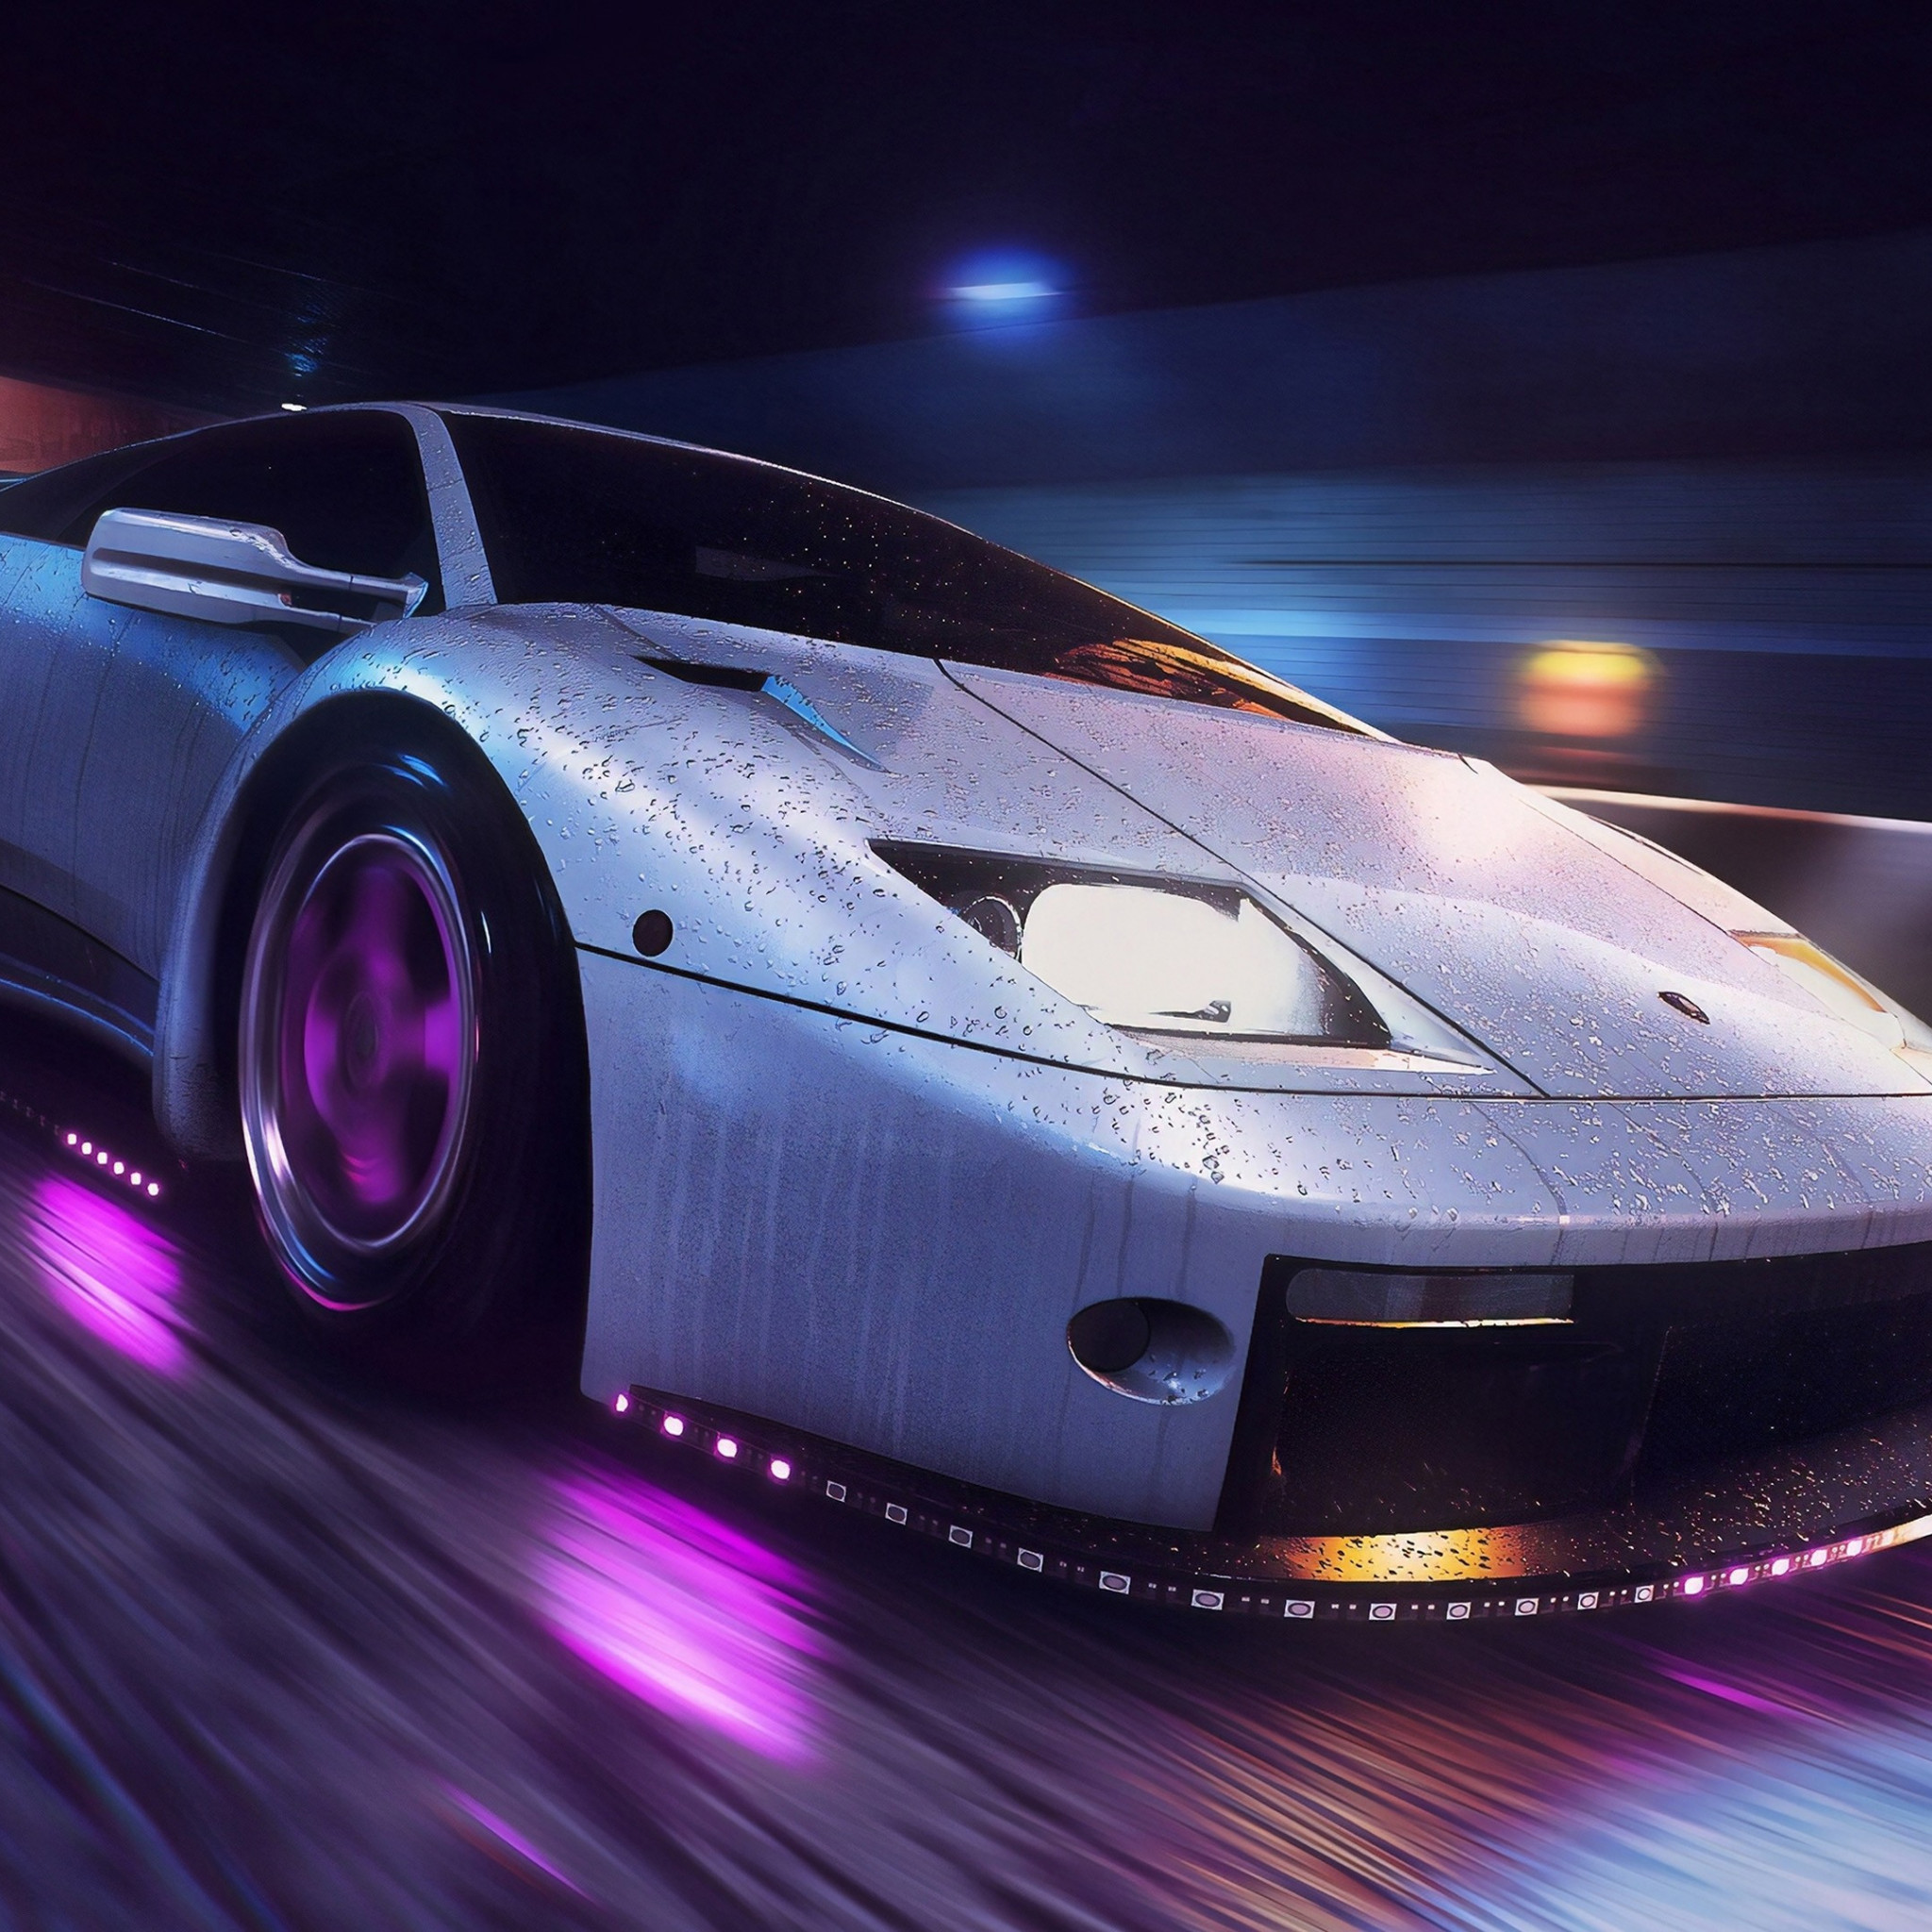 Download wallpaper: Need for Speed Heat 2048x2048